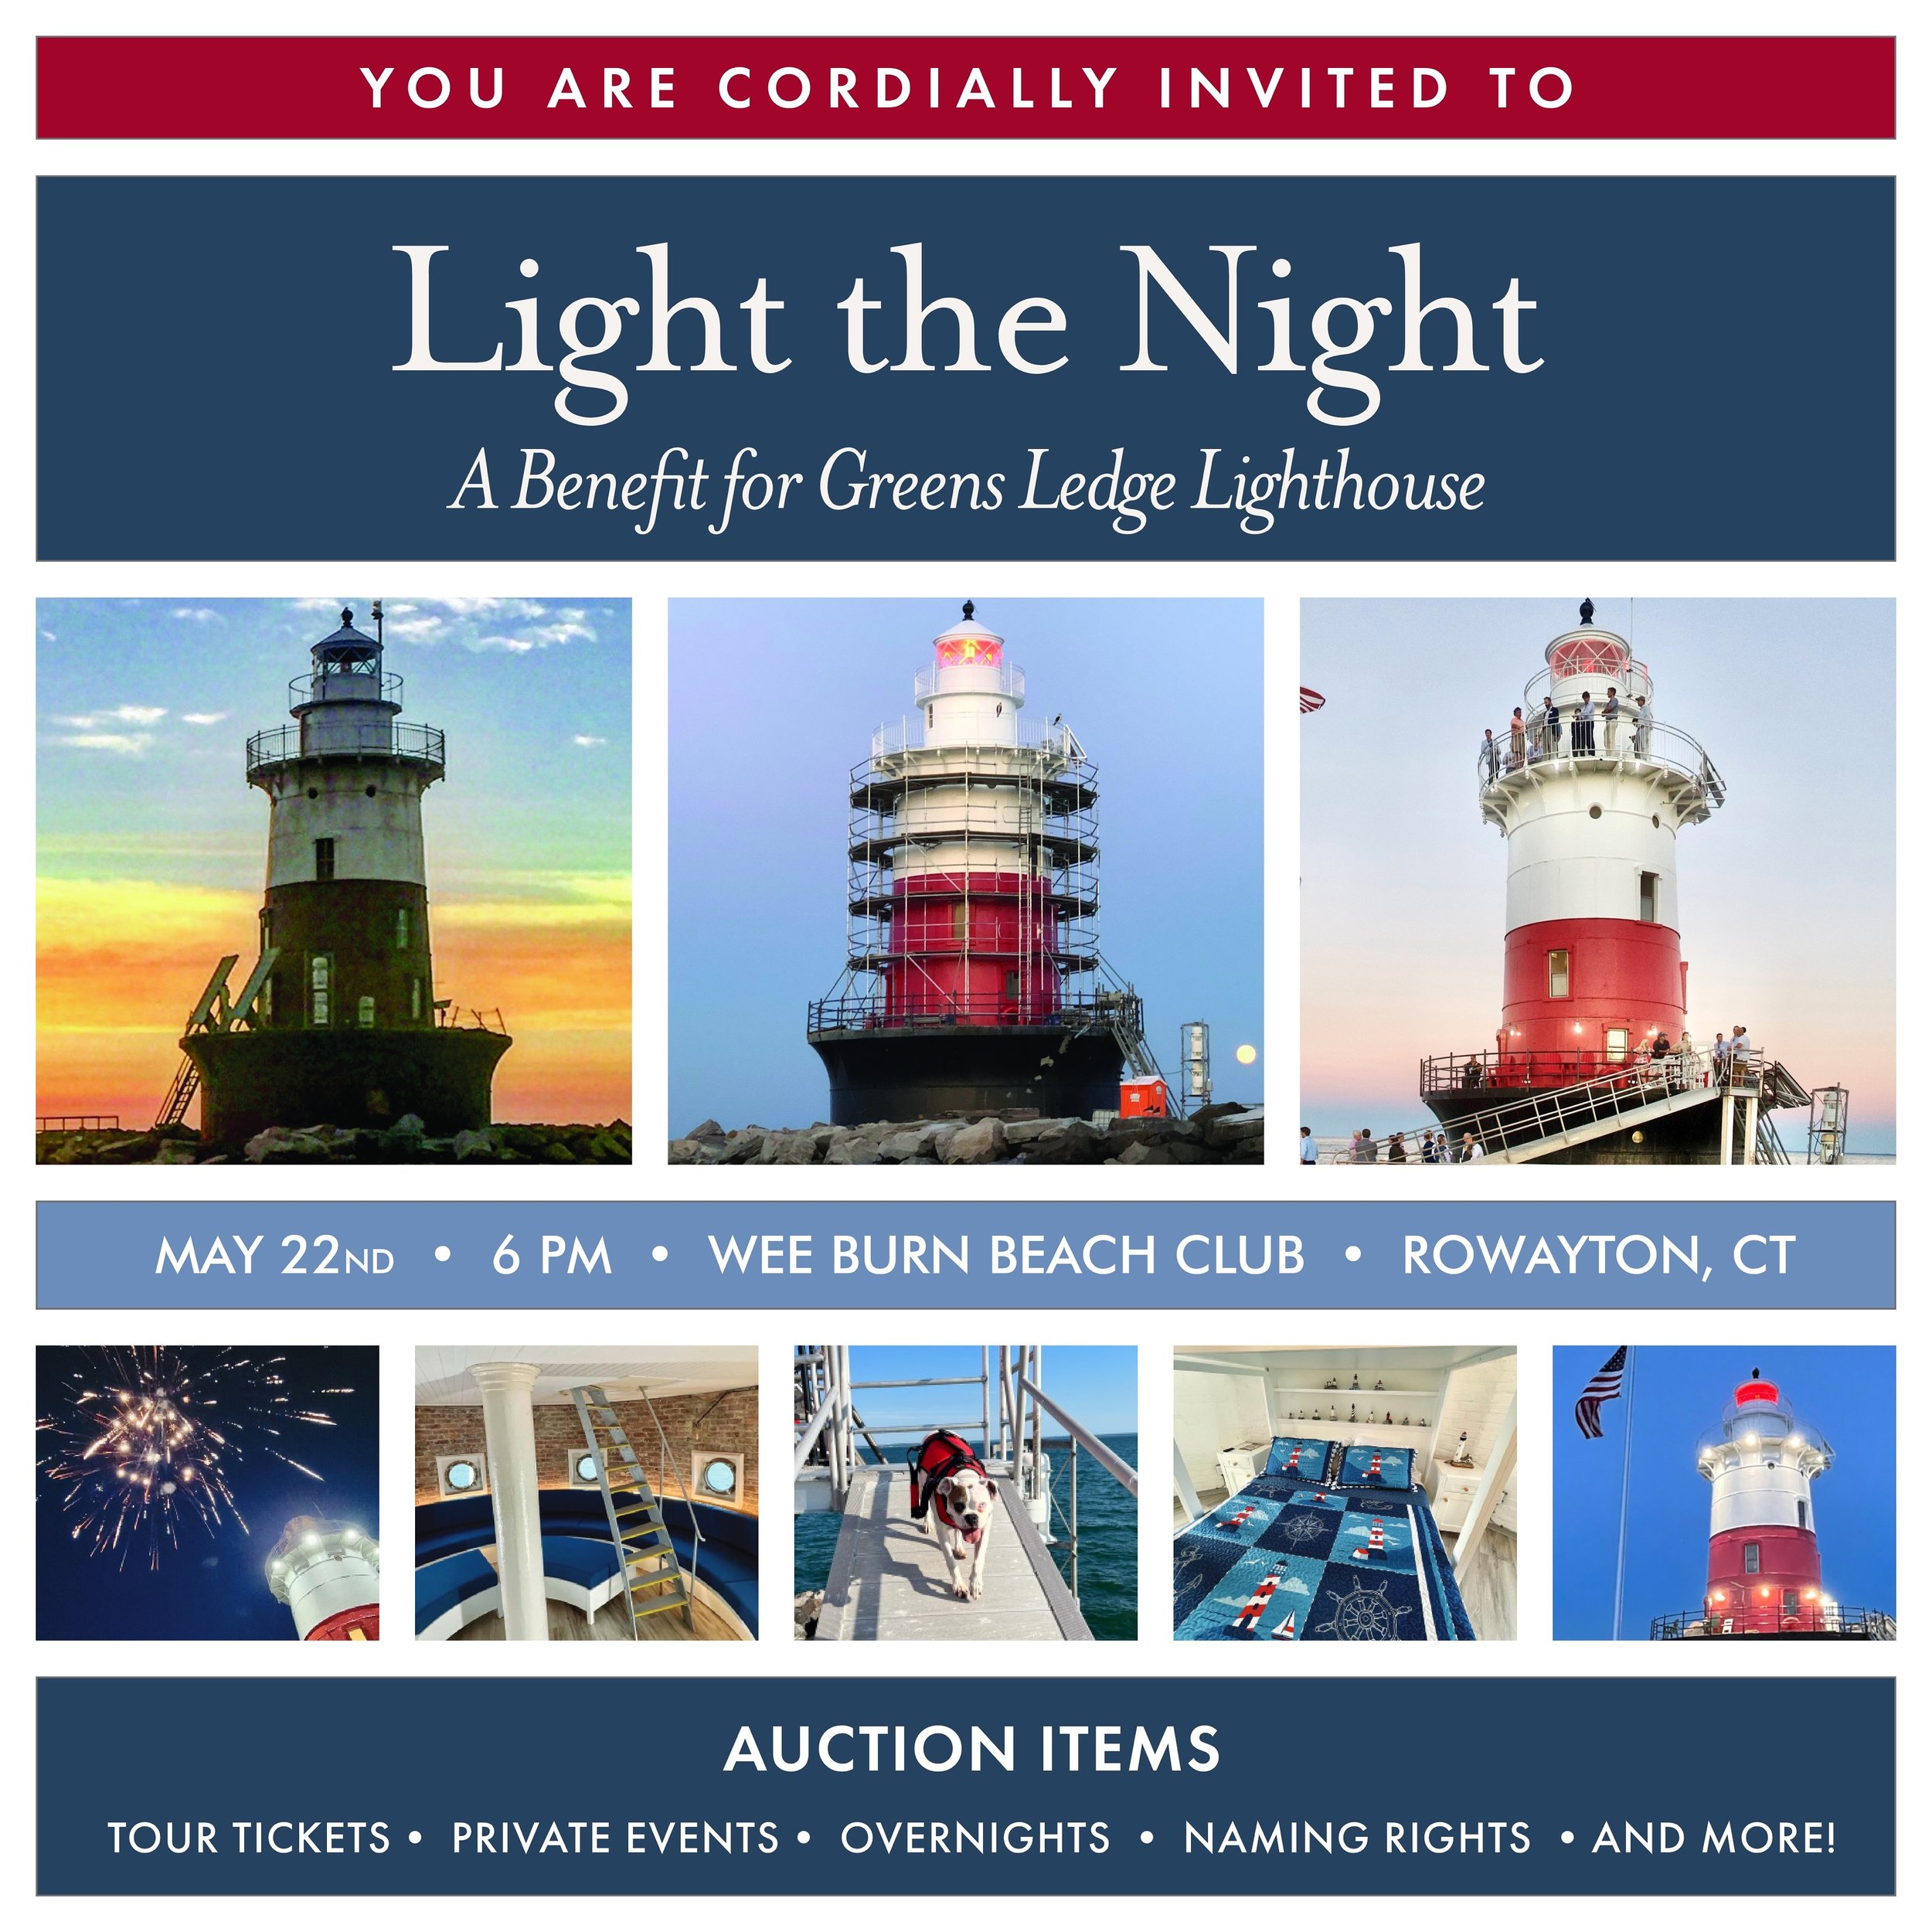 One Month from Today! 🌠 Light the Night 2024

Join us for our Second Annual &ldquo;Light the Night&rdquo; event on Wednesday, May 22nd at Wee Burn Beach Club to launch the next chapter in the Lighthouse&rsquo;s epic history.
 
Thanks to generous don